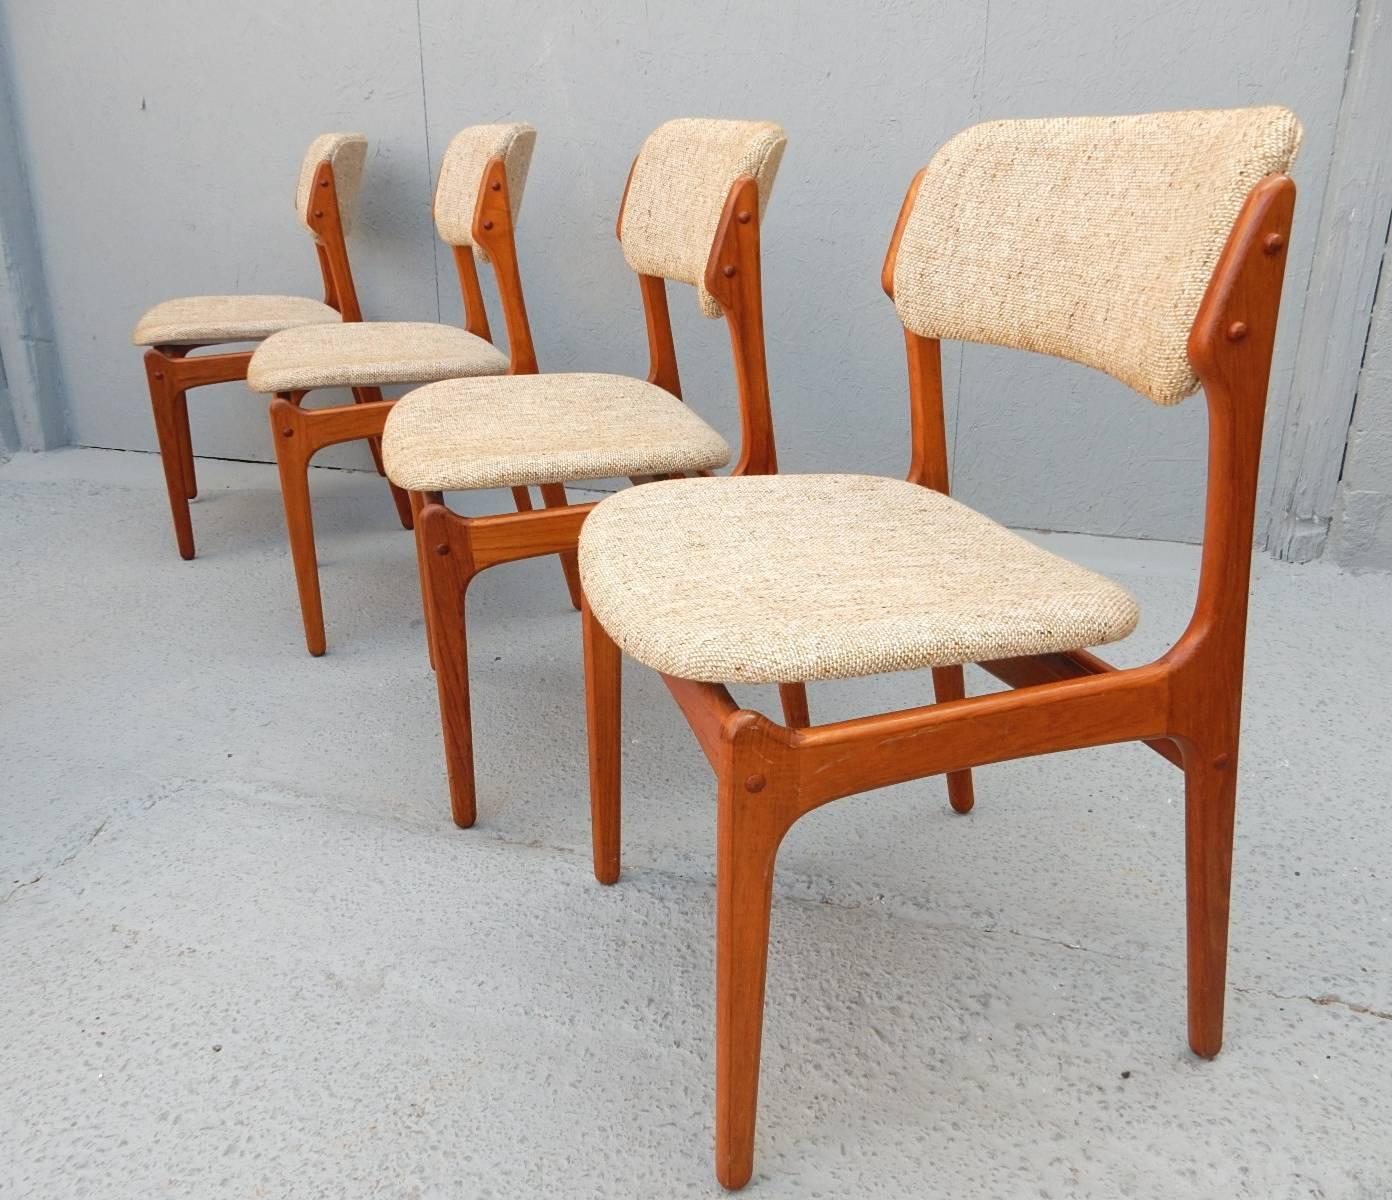 Beautiful set of six Danish dining chairs designed by Erik Buch for O.D. Møbler of Denmark. Number 49
Two armchairs and four sides all with original wool upholstery in excellent condition.
Stunning set all in gorgeous teak wood. Clean, solid and